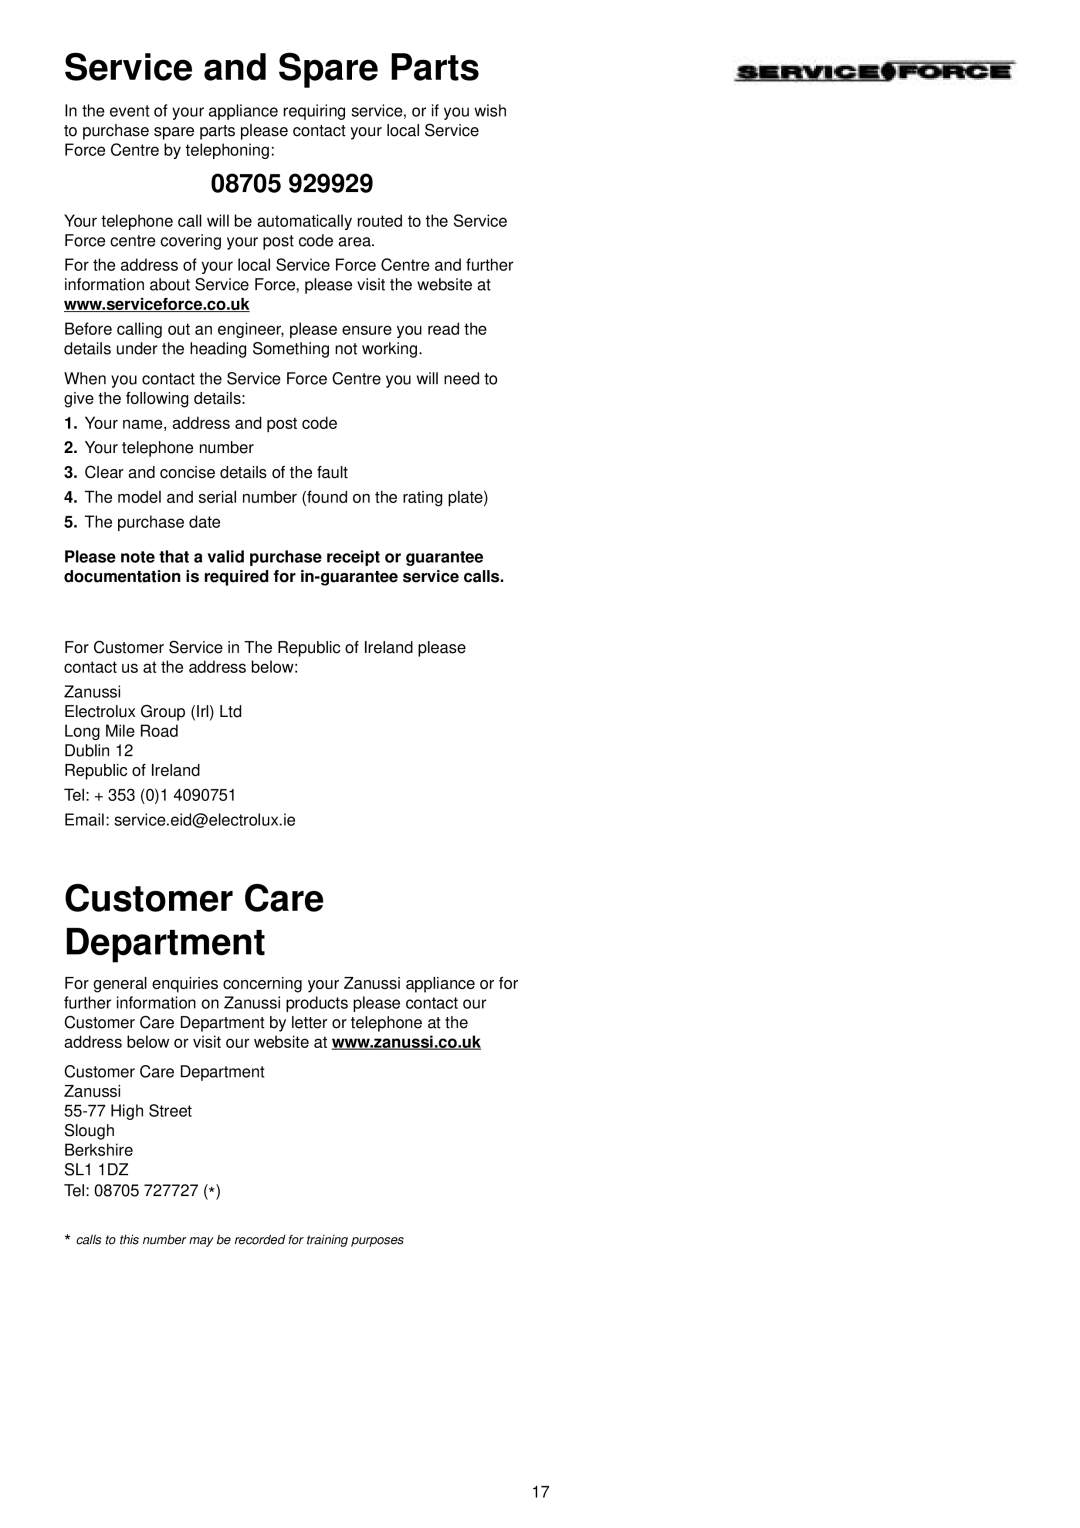 Zanussi ZDT 6053 manual Service and Spare Parts, Customer Care Department, 08705 